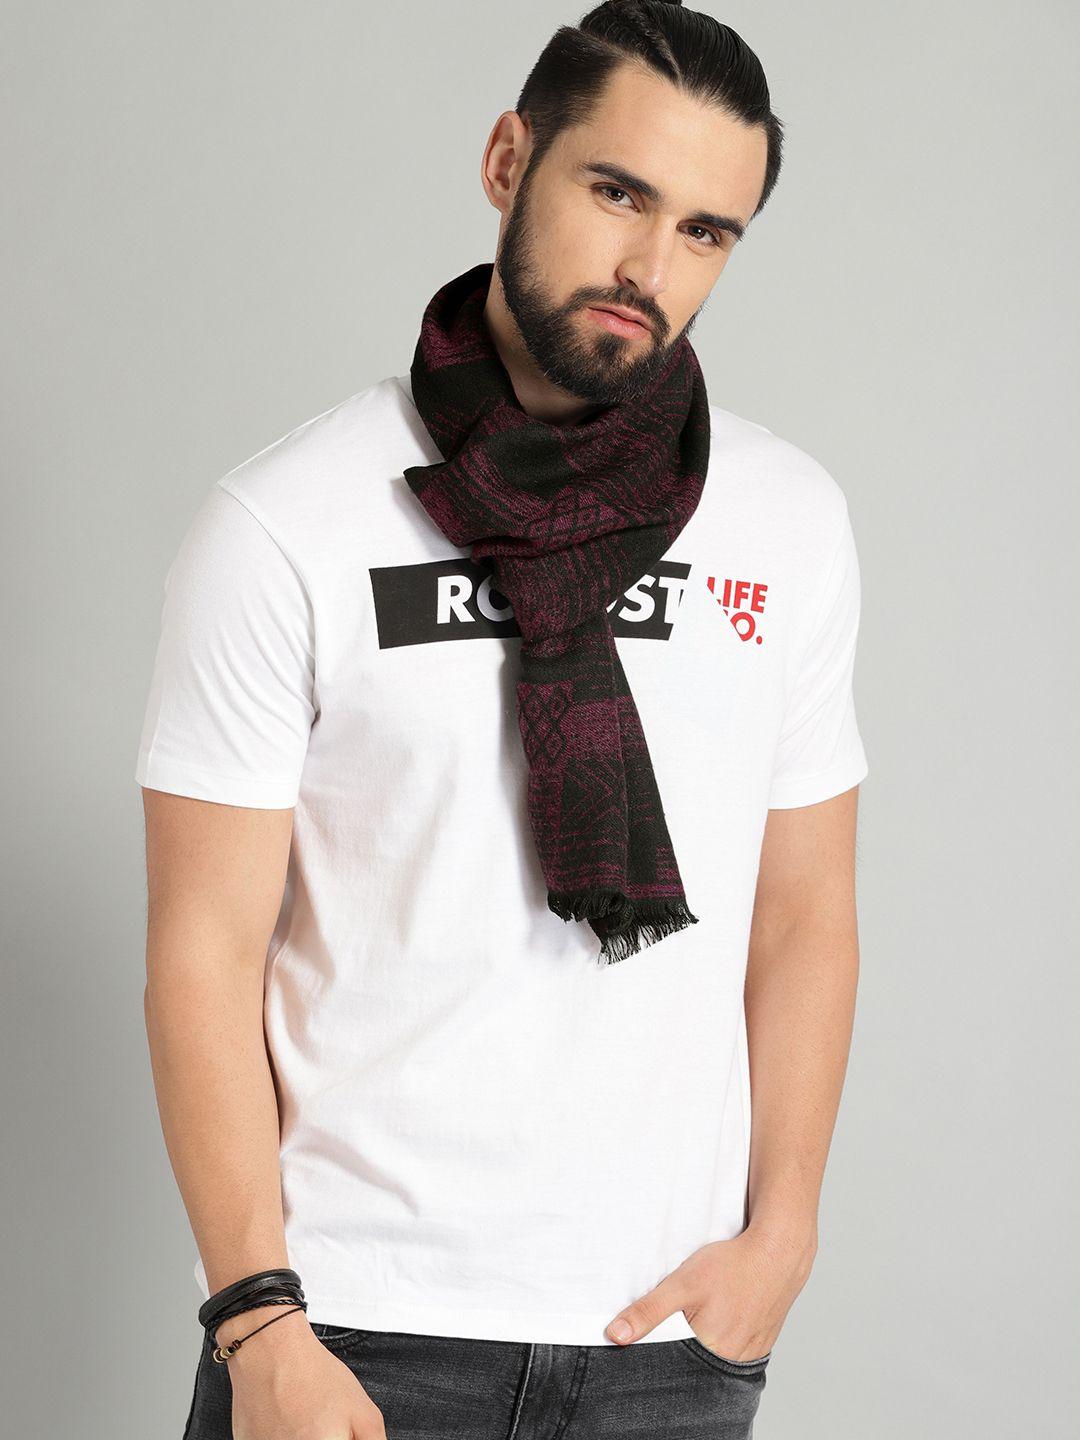 the roadster lifestyle co unisex maroon & black printed scarf